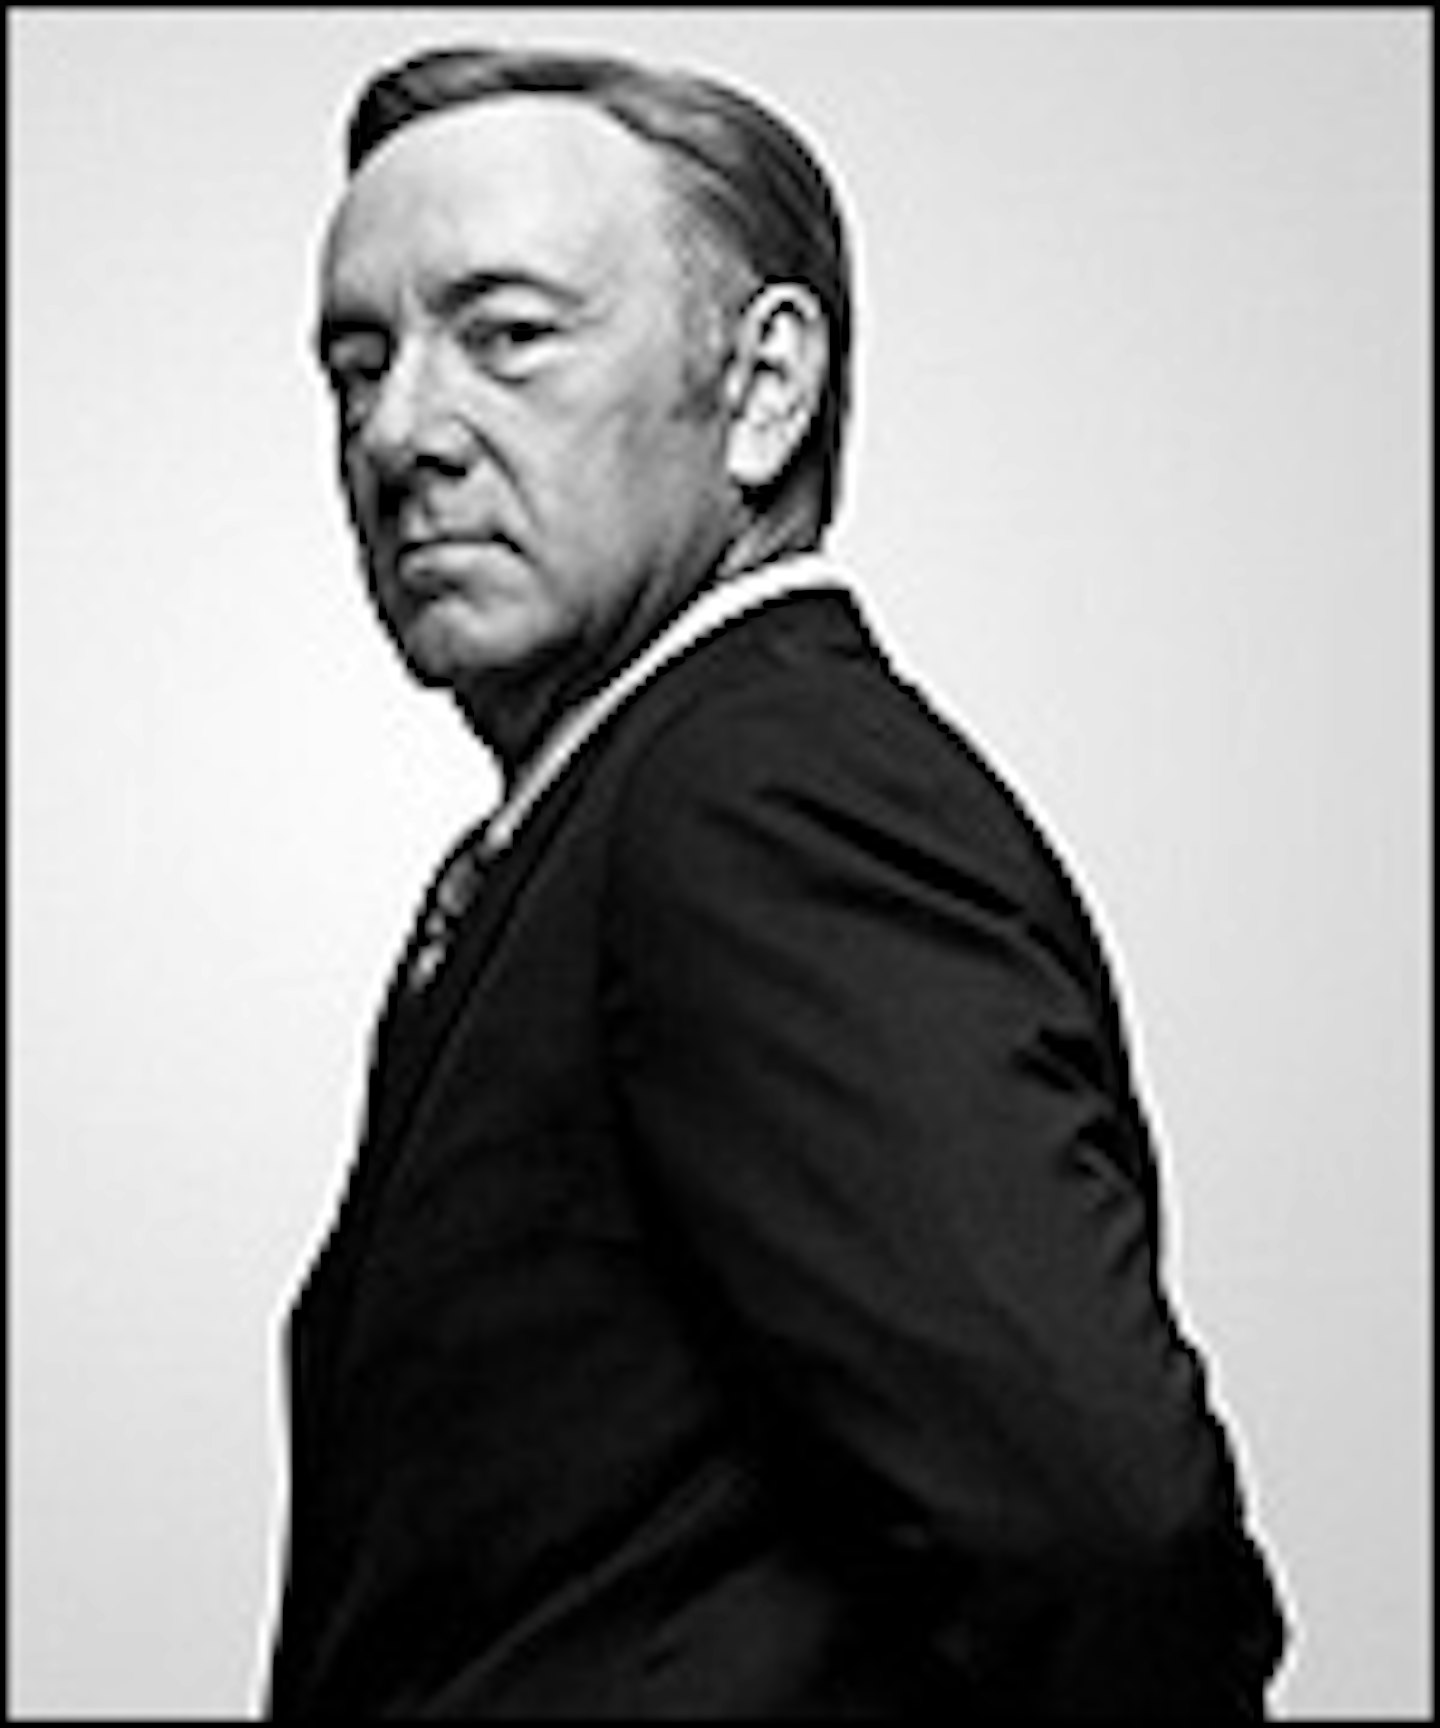 New Imagery For House Of Cards